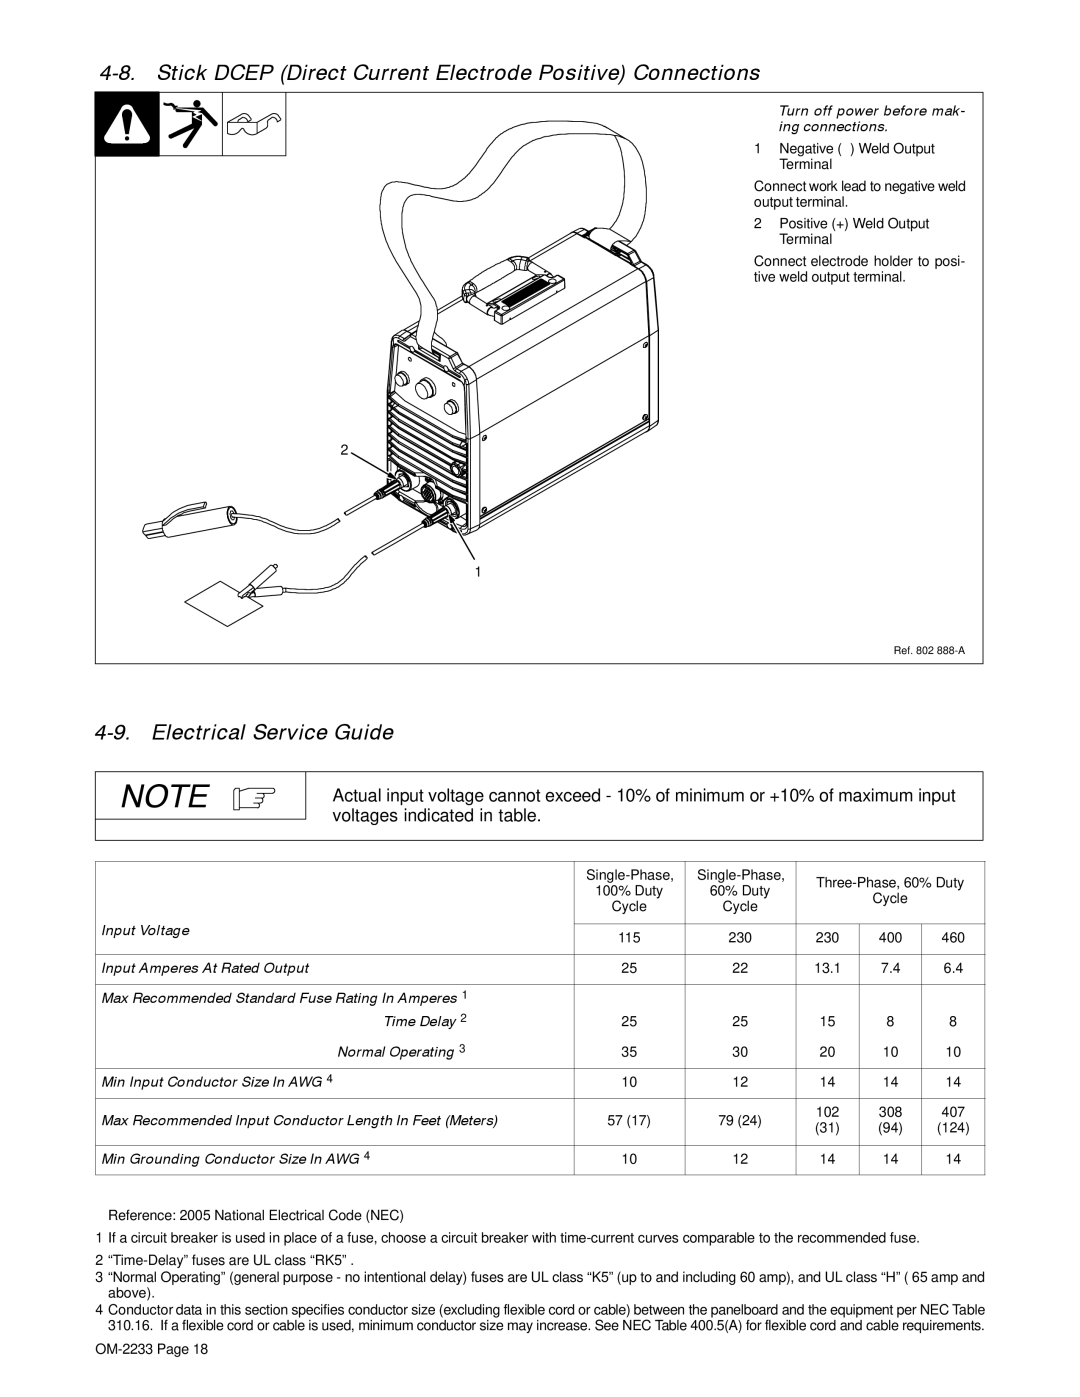 Miller Electric Maxstar 200 STR manual Stick Dcep Direct Current Electrode Positive Connections, Electrical Service Guide 